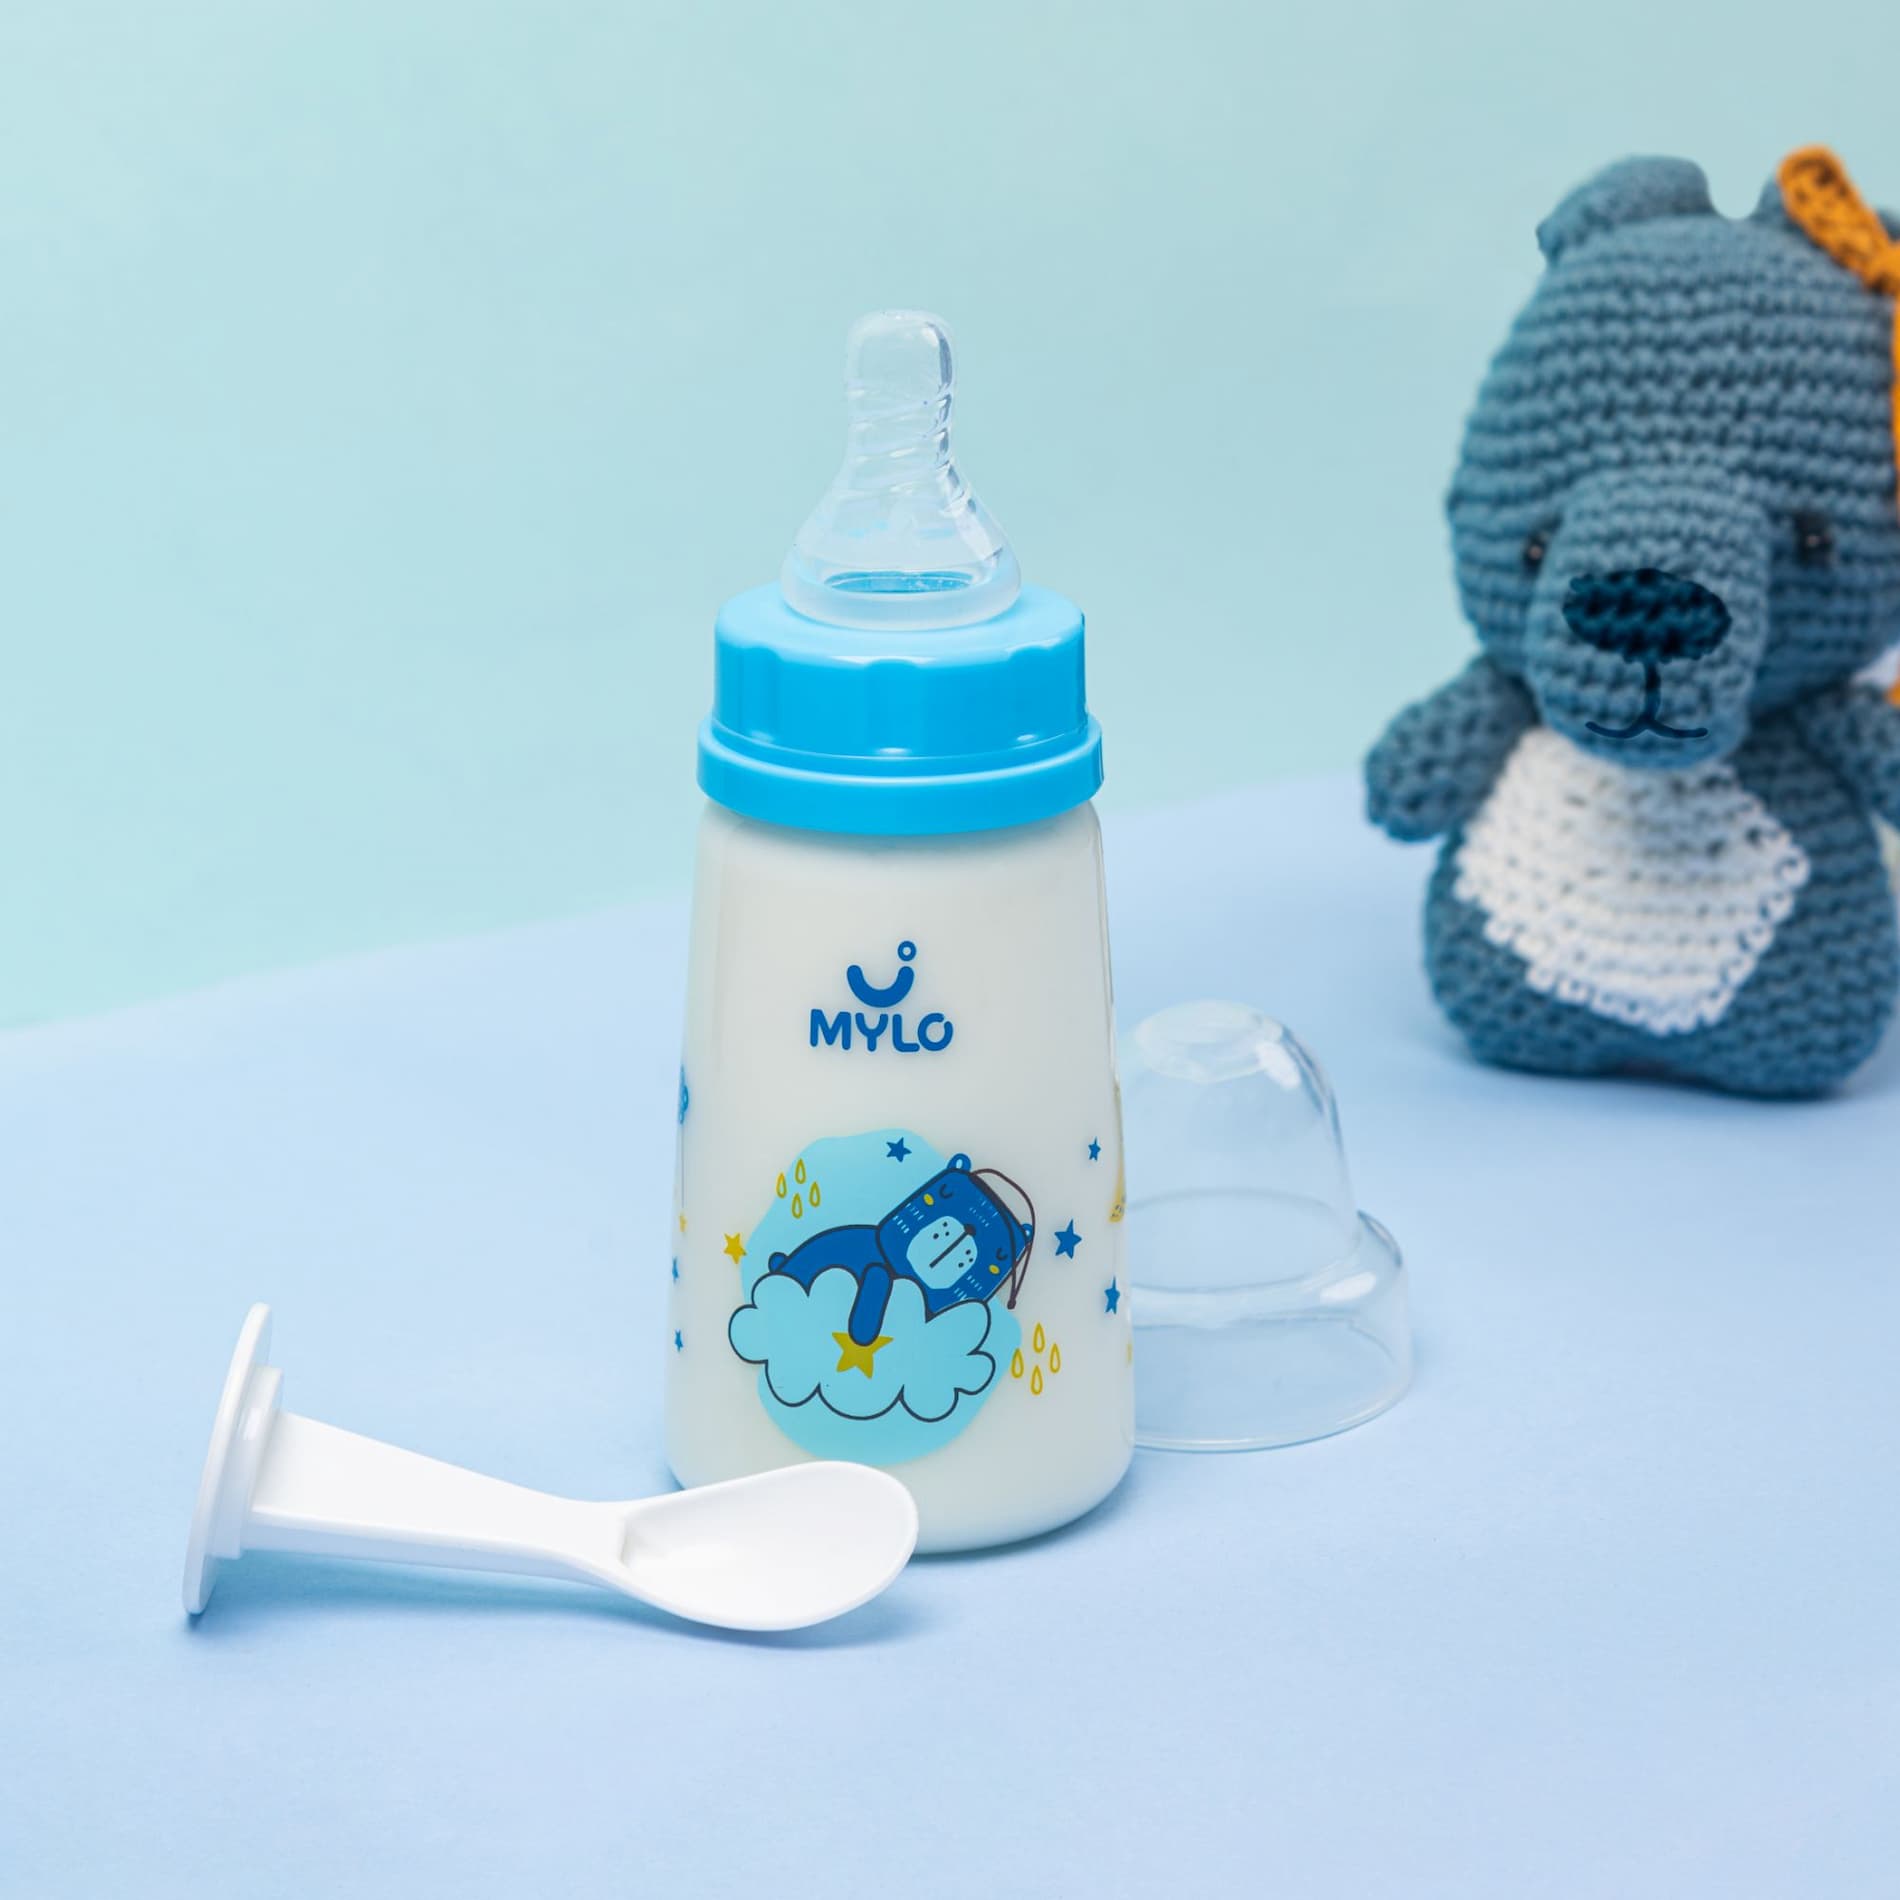 Mylo Feels Natural Baby Bottle – 125ml - BPA Free with Anti-Colic Nipple (Bear)